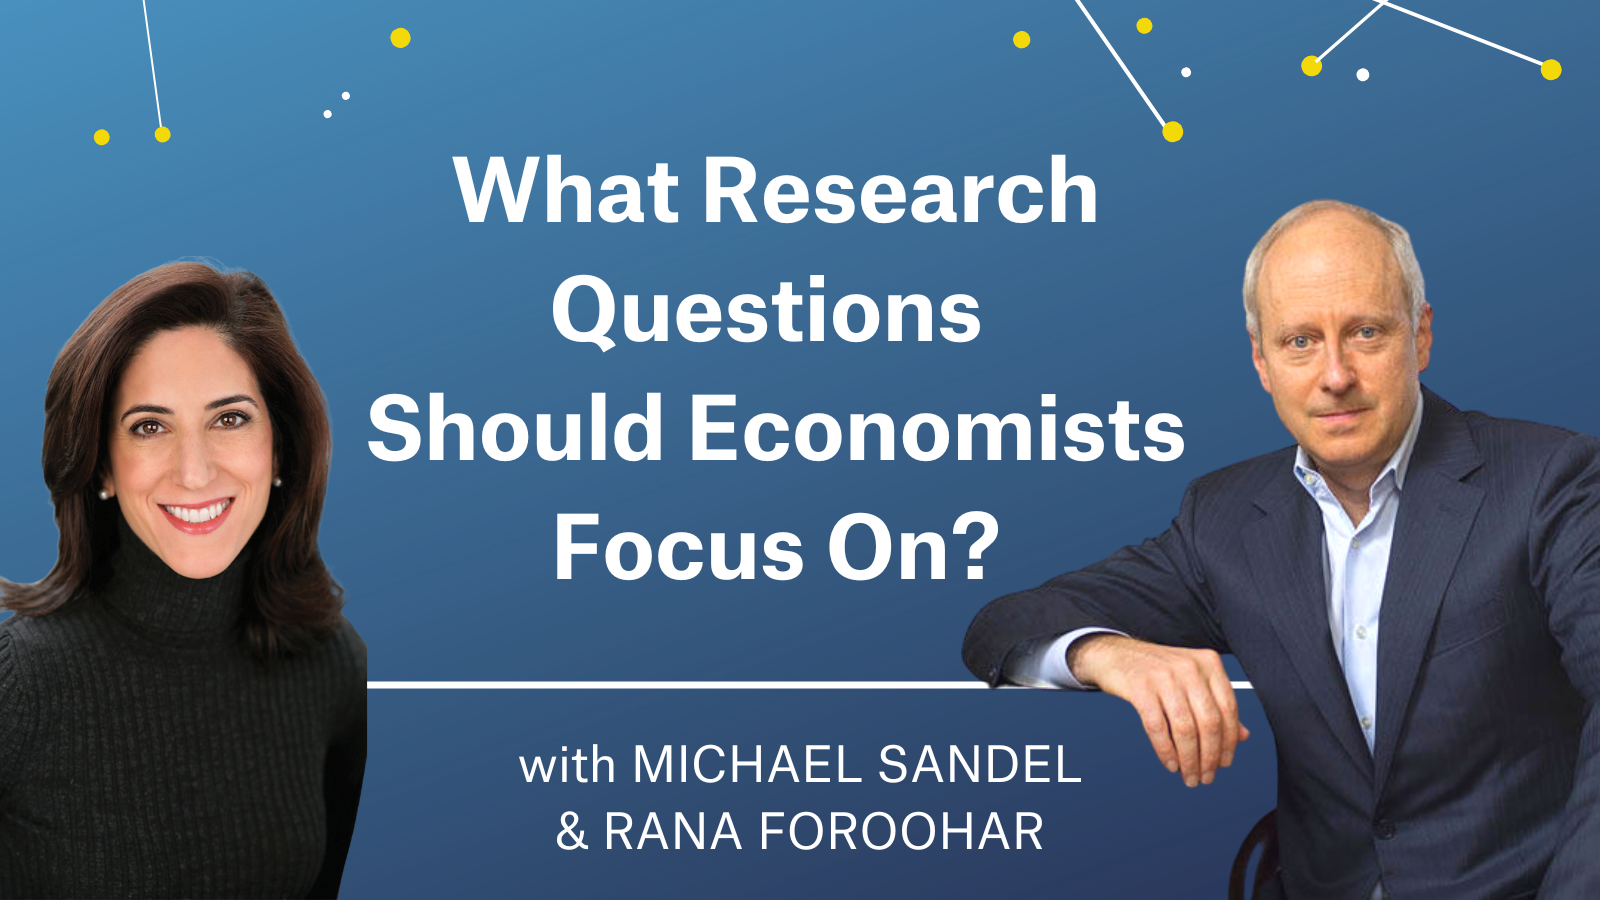 Michael Sandel and Rana Foroohar | The Most Pertinent Questions for Economists to Answer